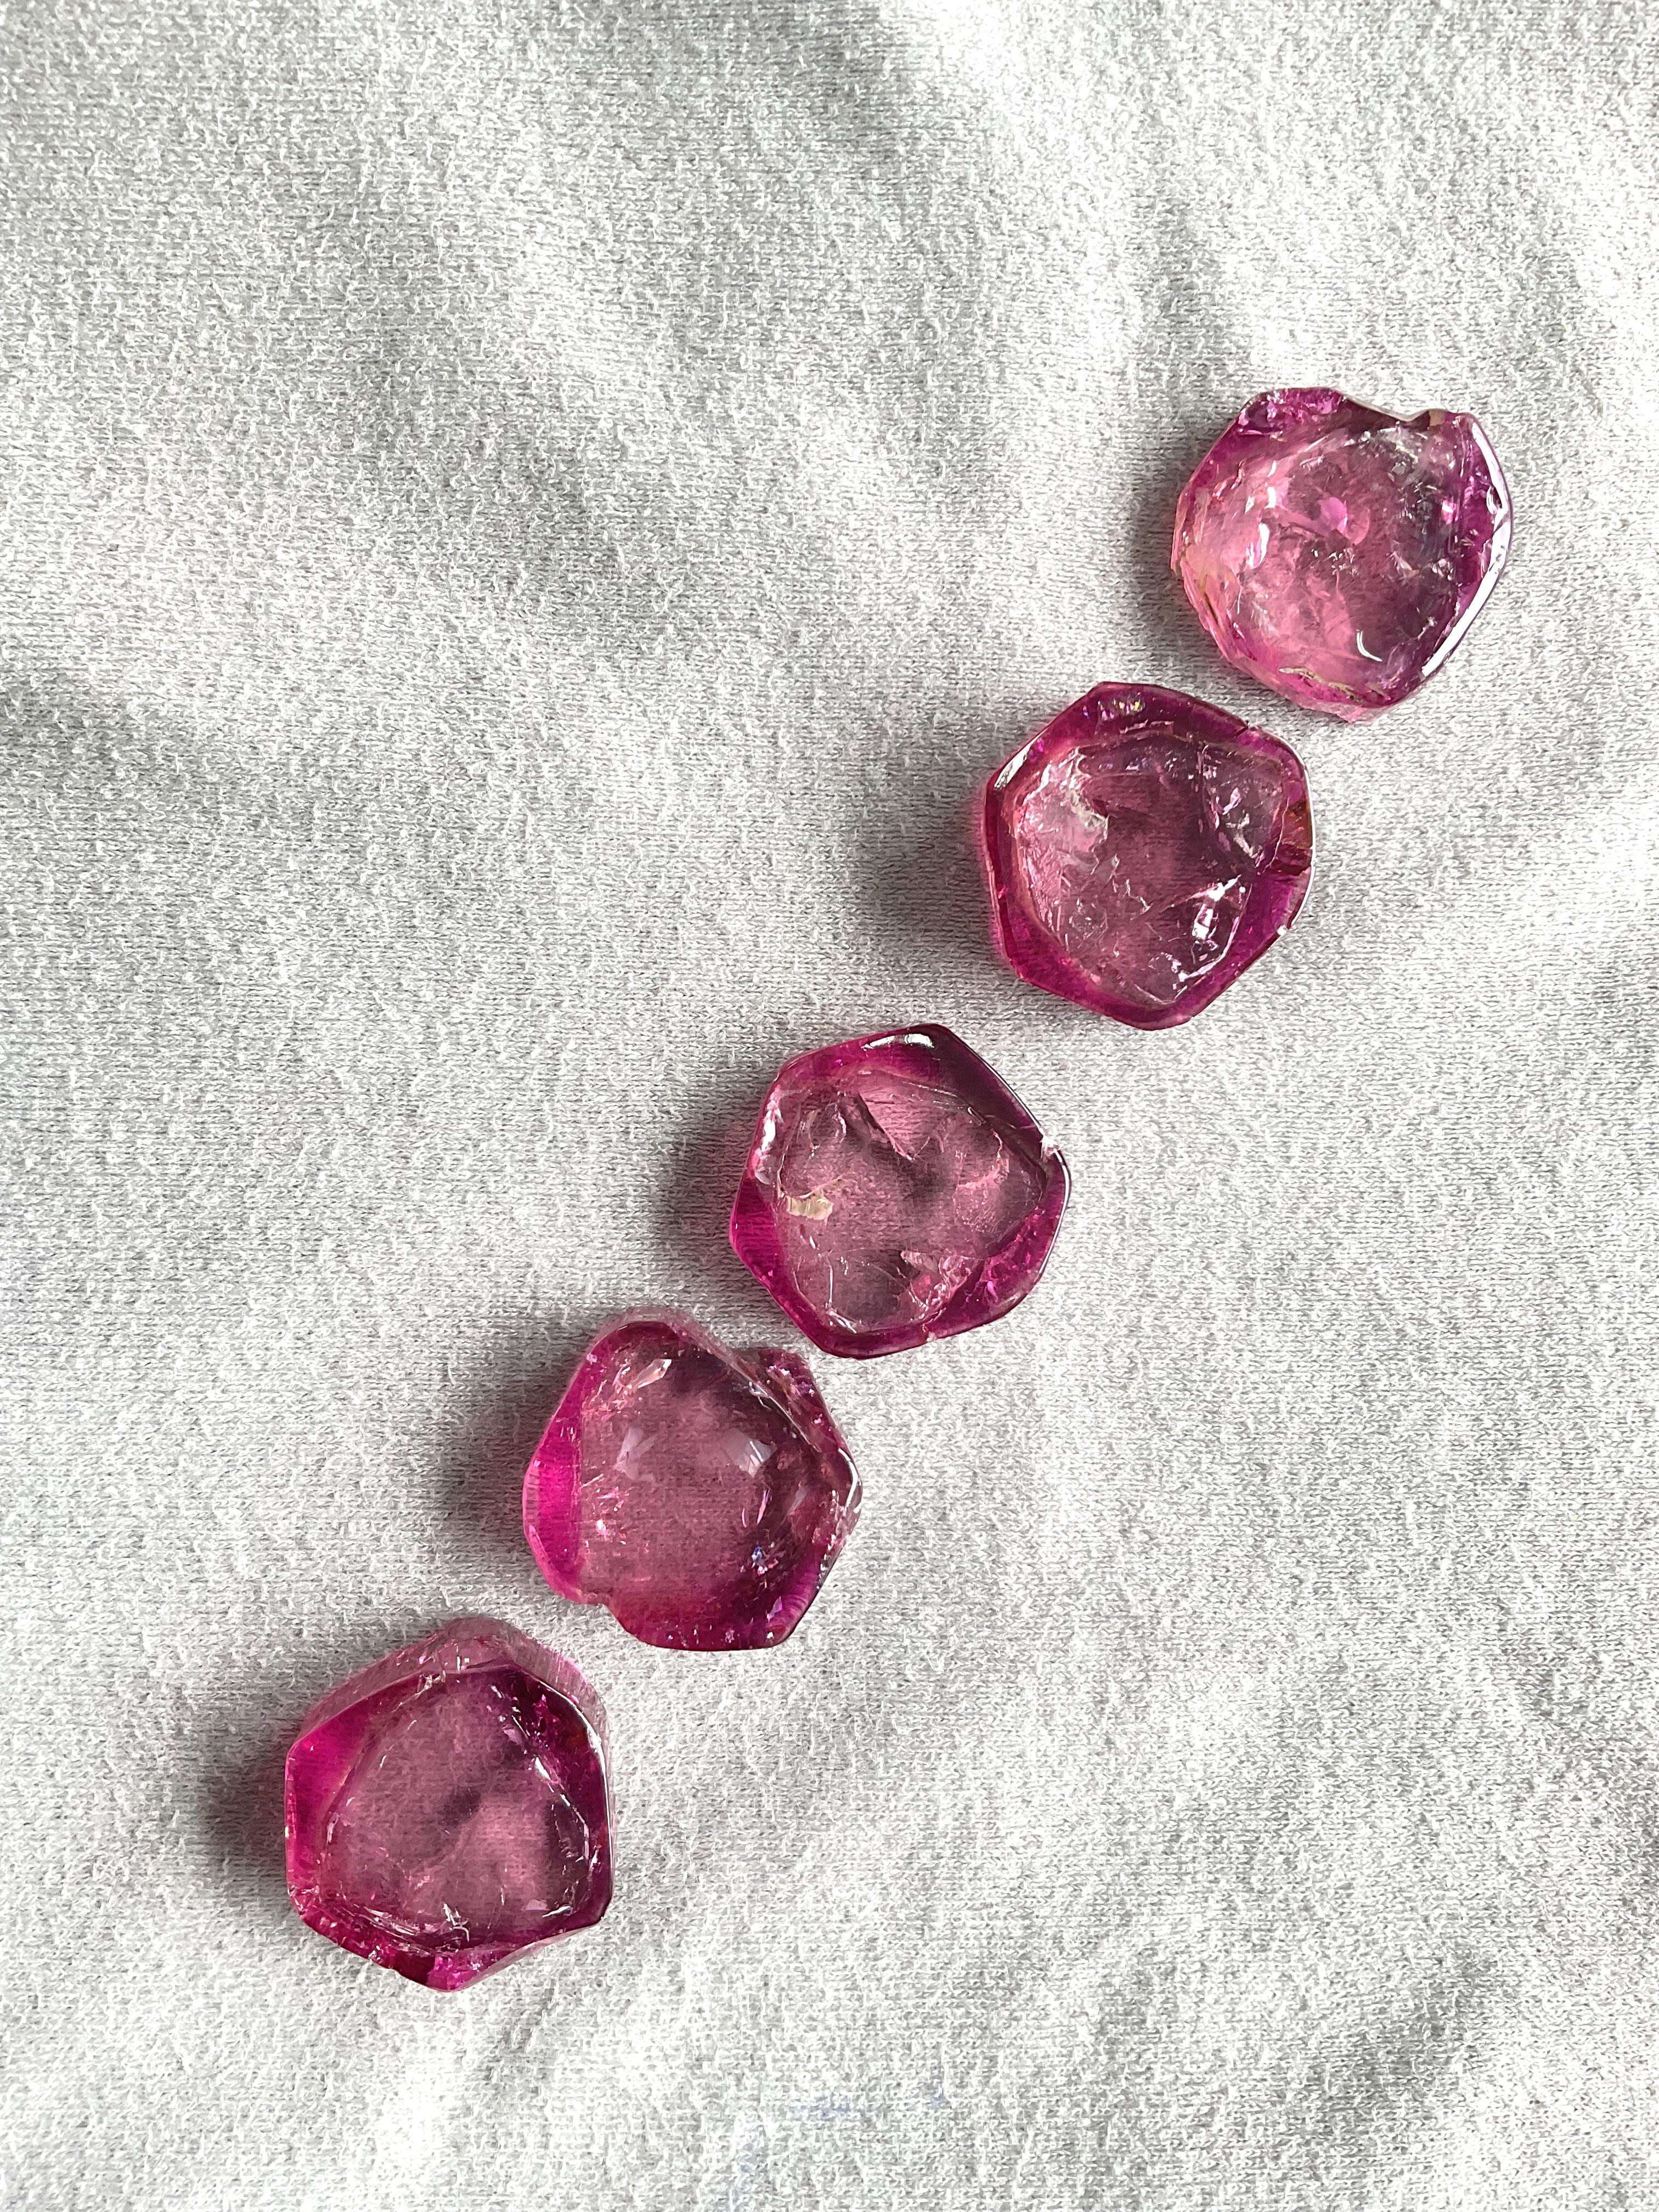 239.56 Carats Pink Color Tourmaline Natural Slices For Top Fine Jewelry Gemstone

Gemstone - Tourmaline
Weight- 239.56 Carats
Shape - Slices
Size - 24x22 MM
Pieces - 5